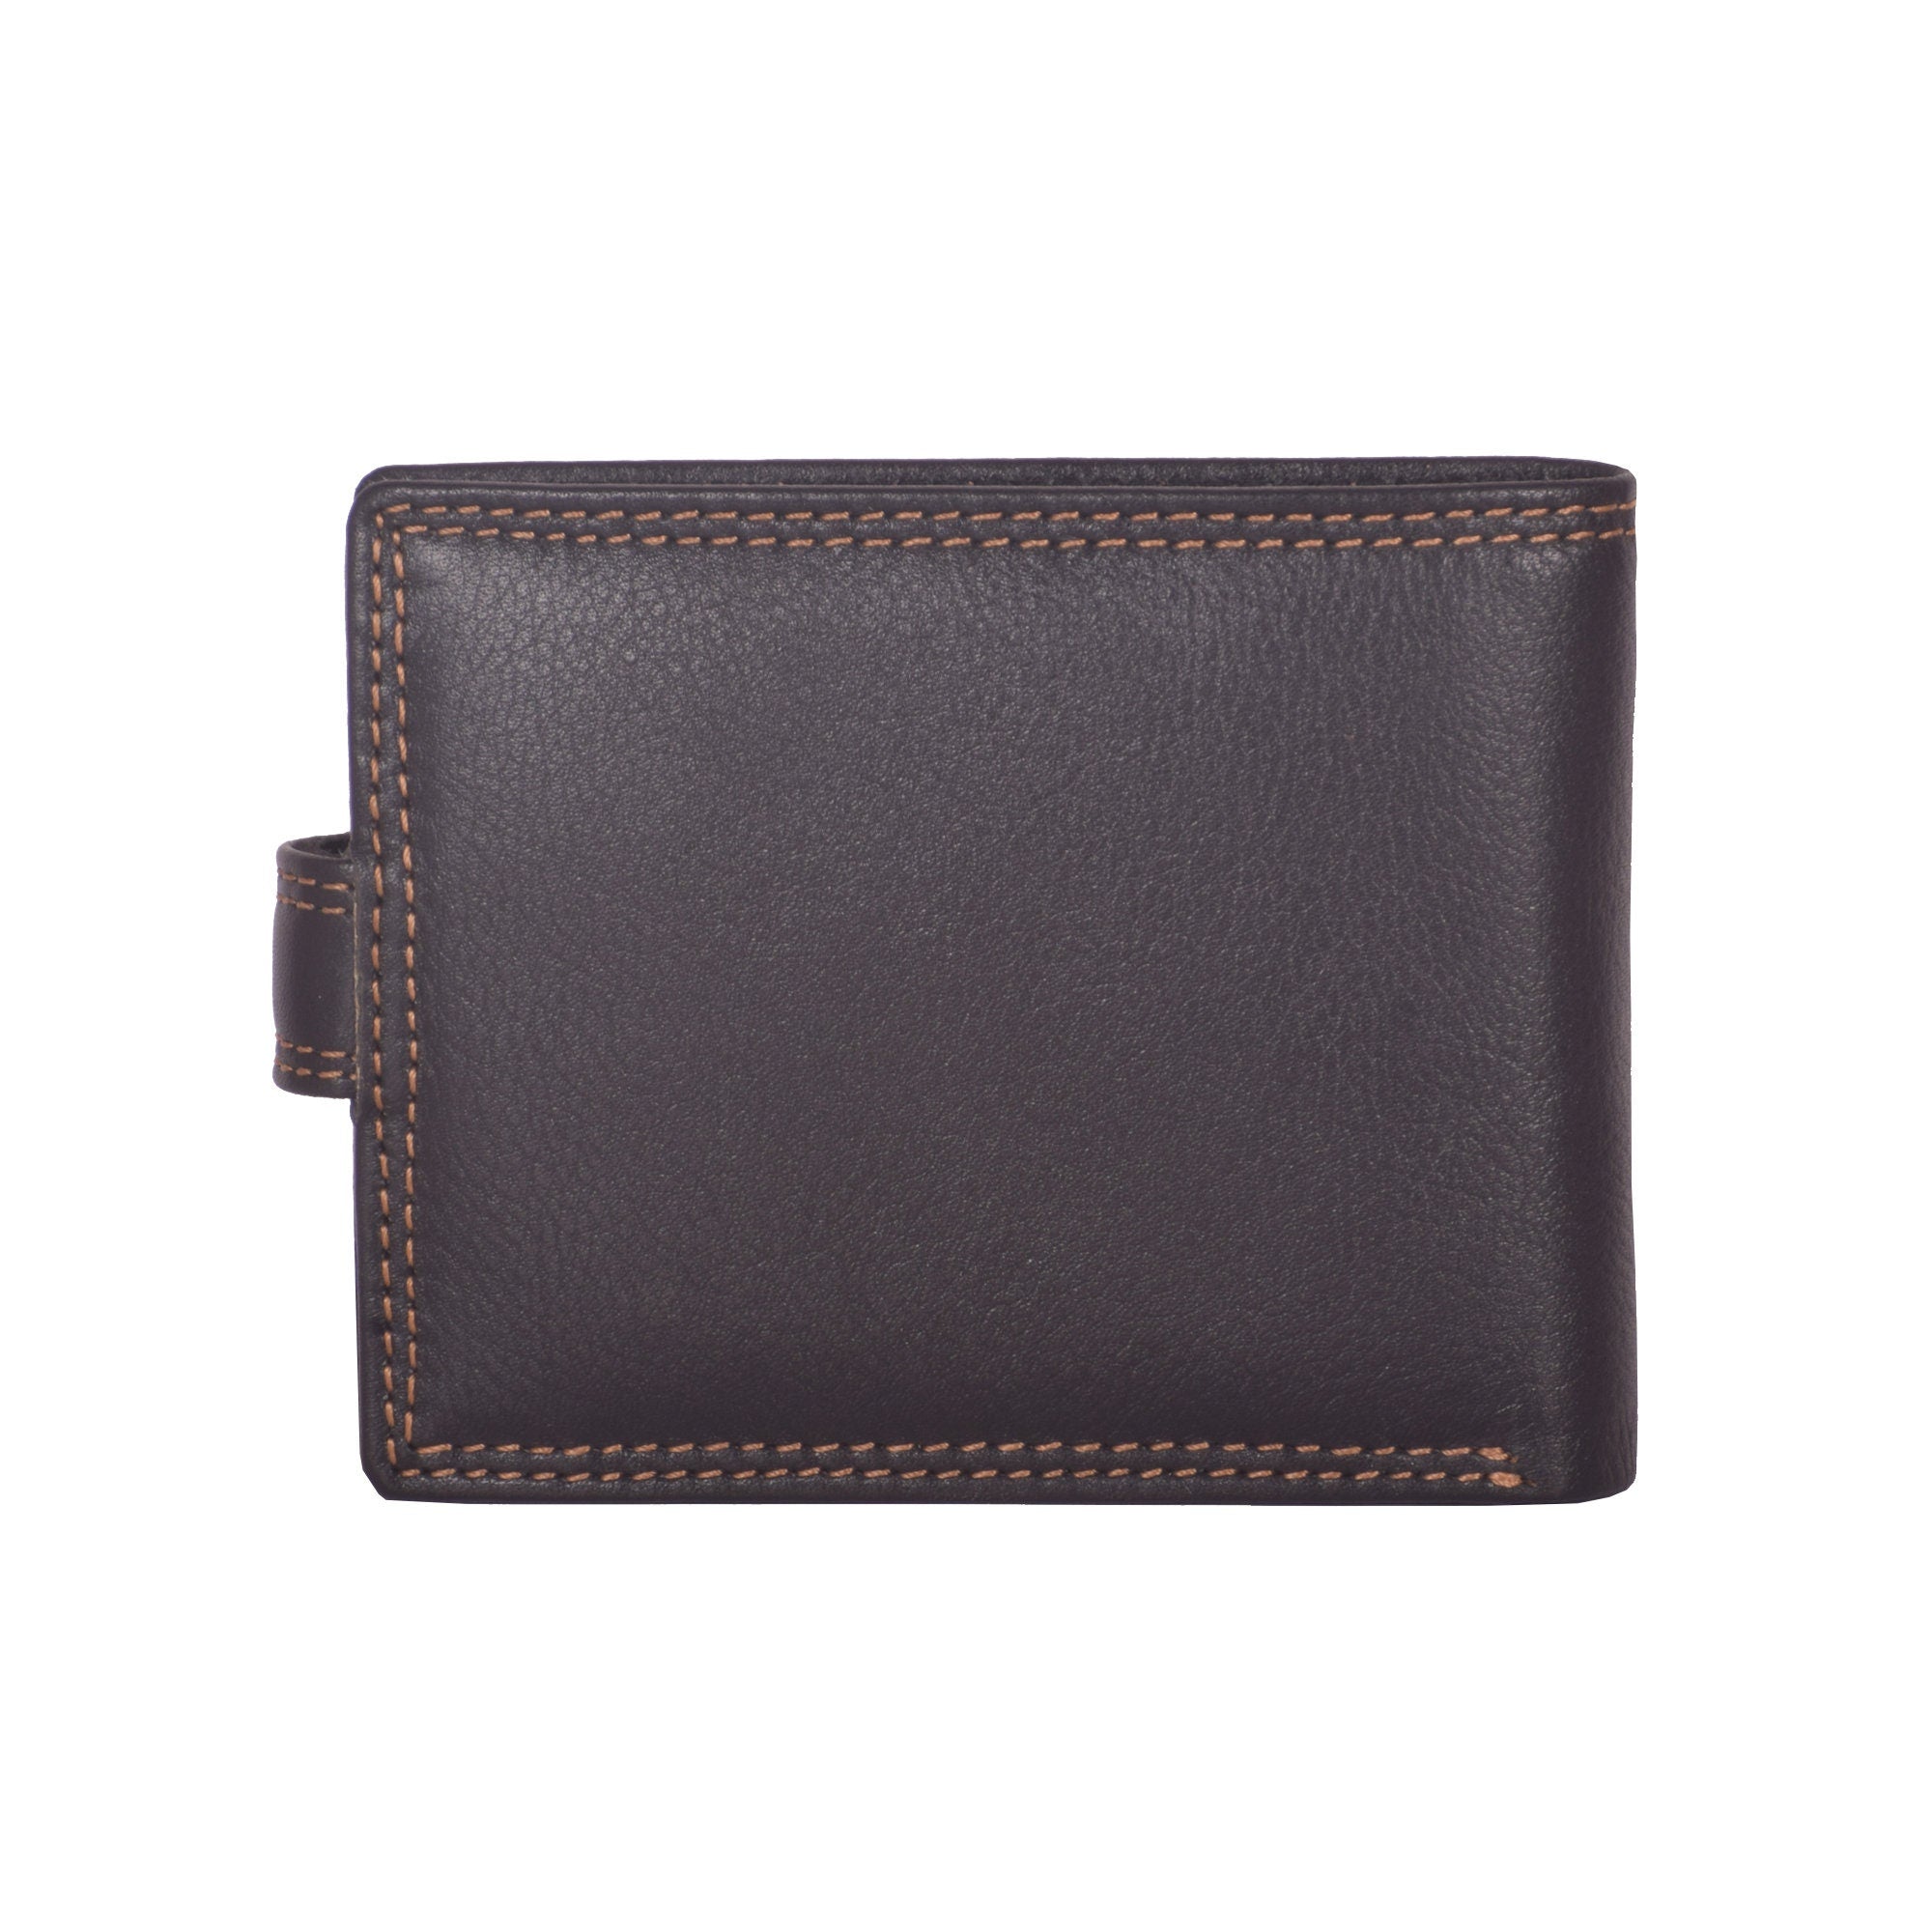 Mens Wallet Long Large Capacity With Zipper Closure Wallet For Men Wallet  Card Holder Wallet Men Slim Wallet Men Leather Wallet Men Leather Long Male  Purse Money Clips Money Bag - Bags